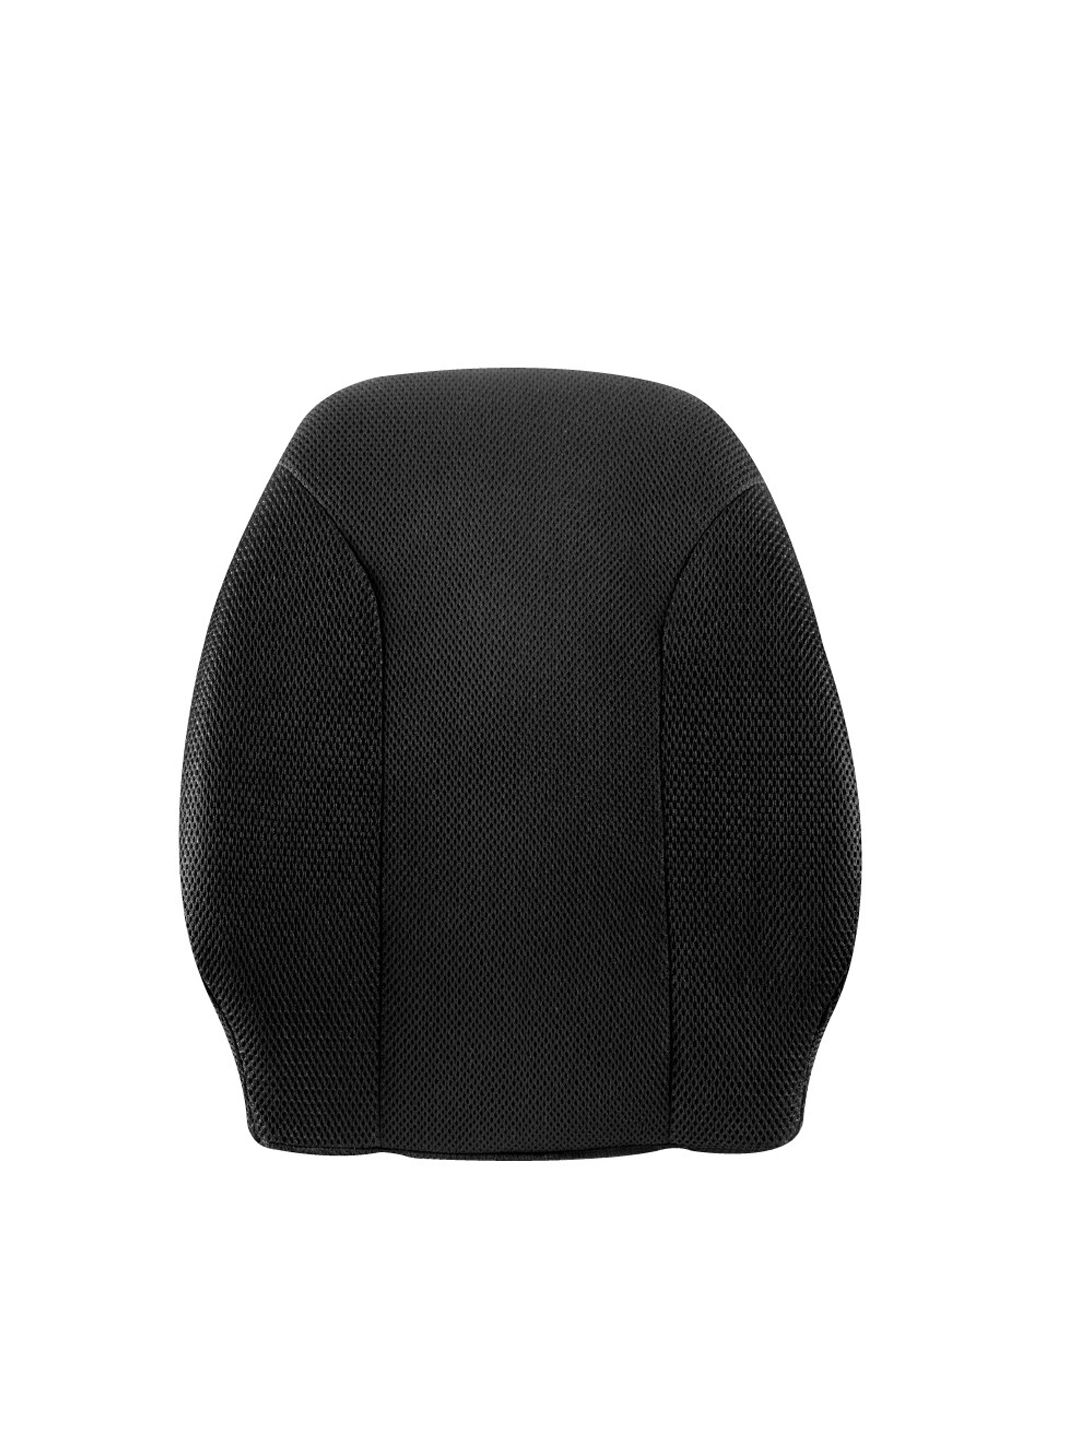 The White Willow Black Memory Foam Lumbar Backrest Pillow for Upper Back Price in India